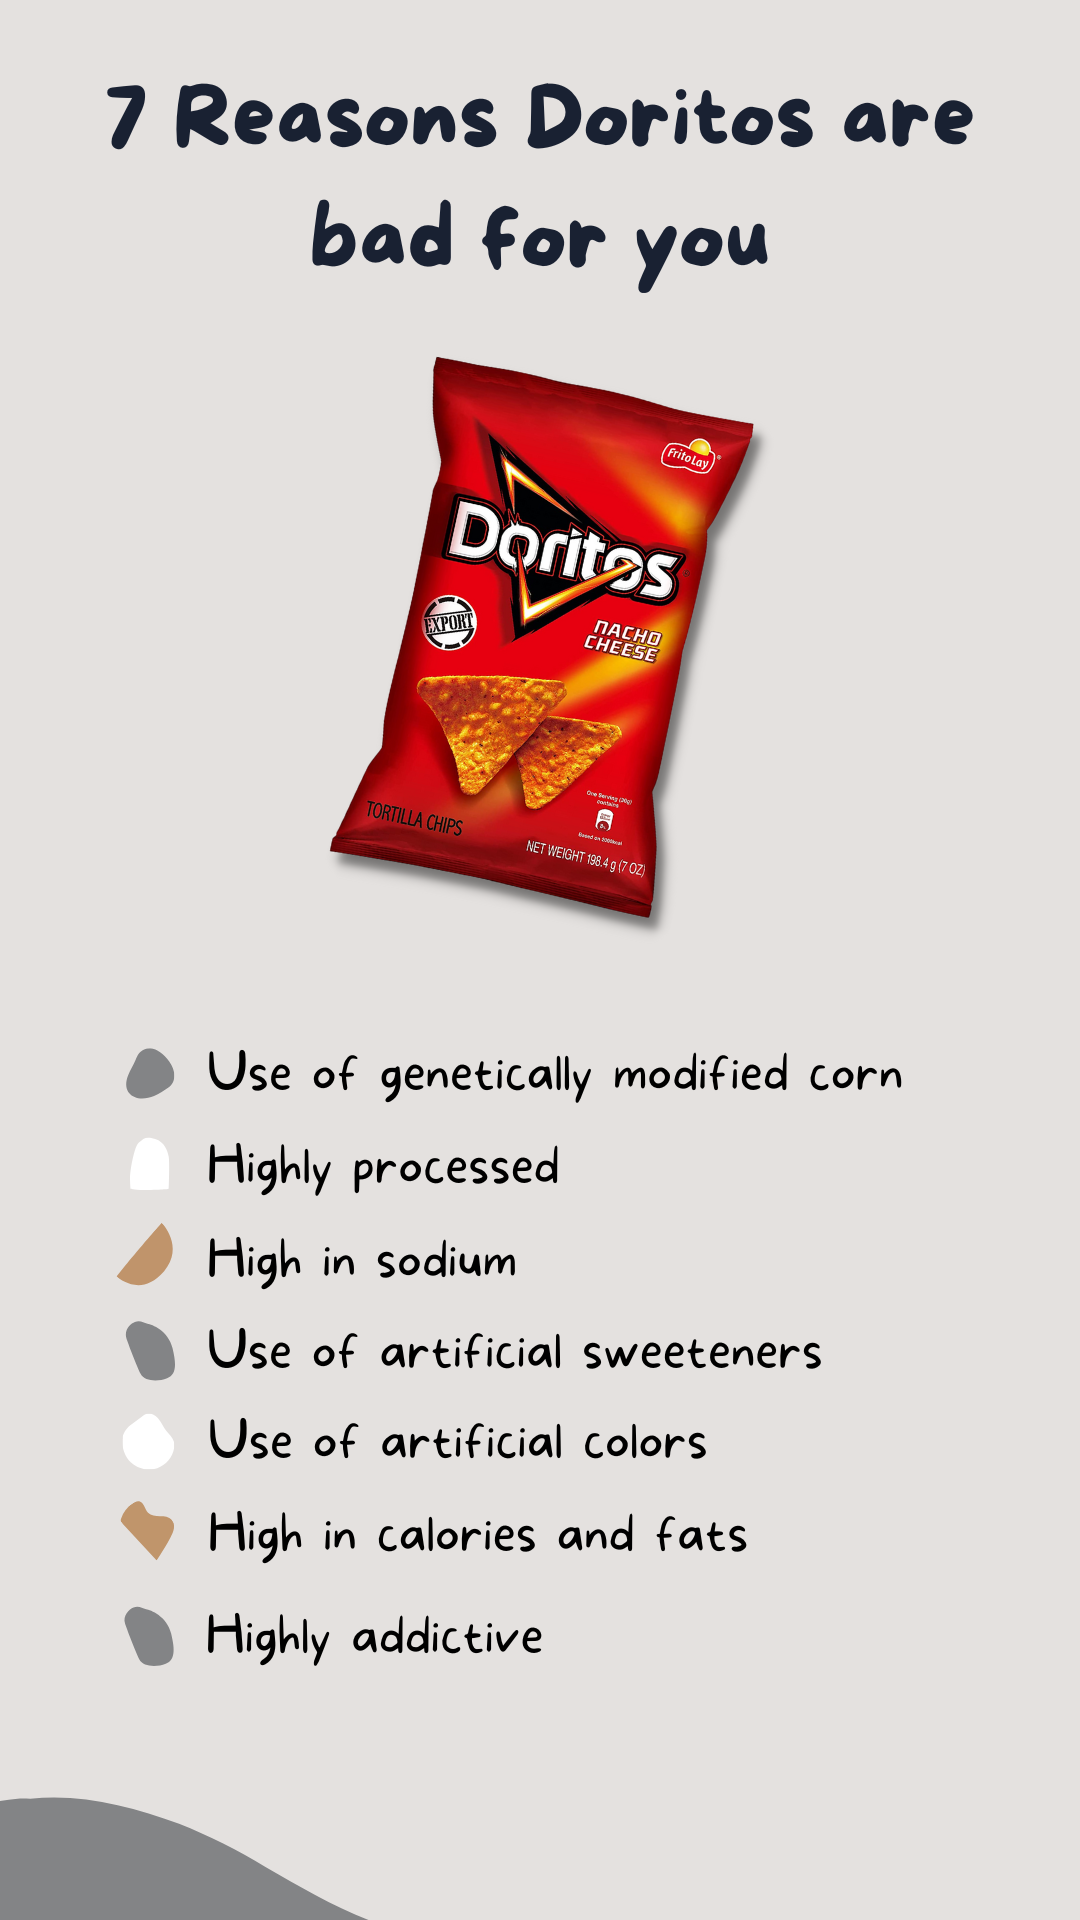 7 Reasons Doritos are bad for you